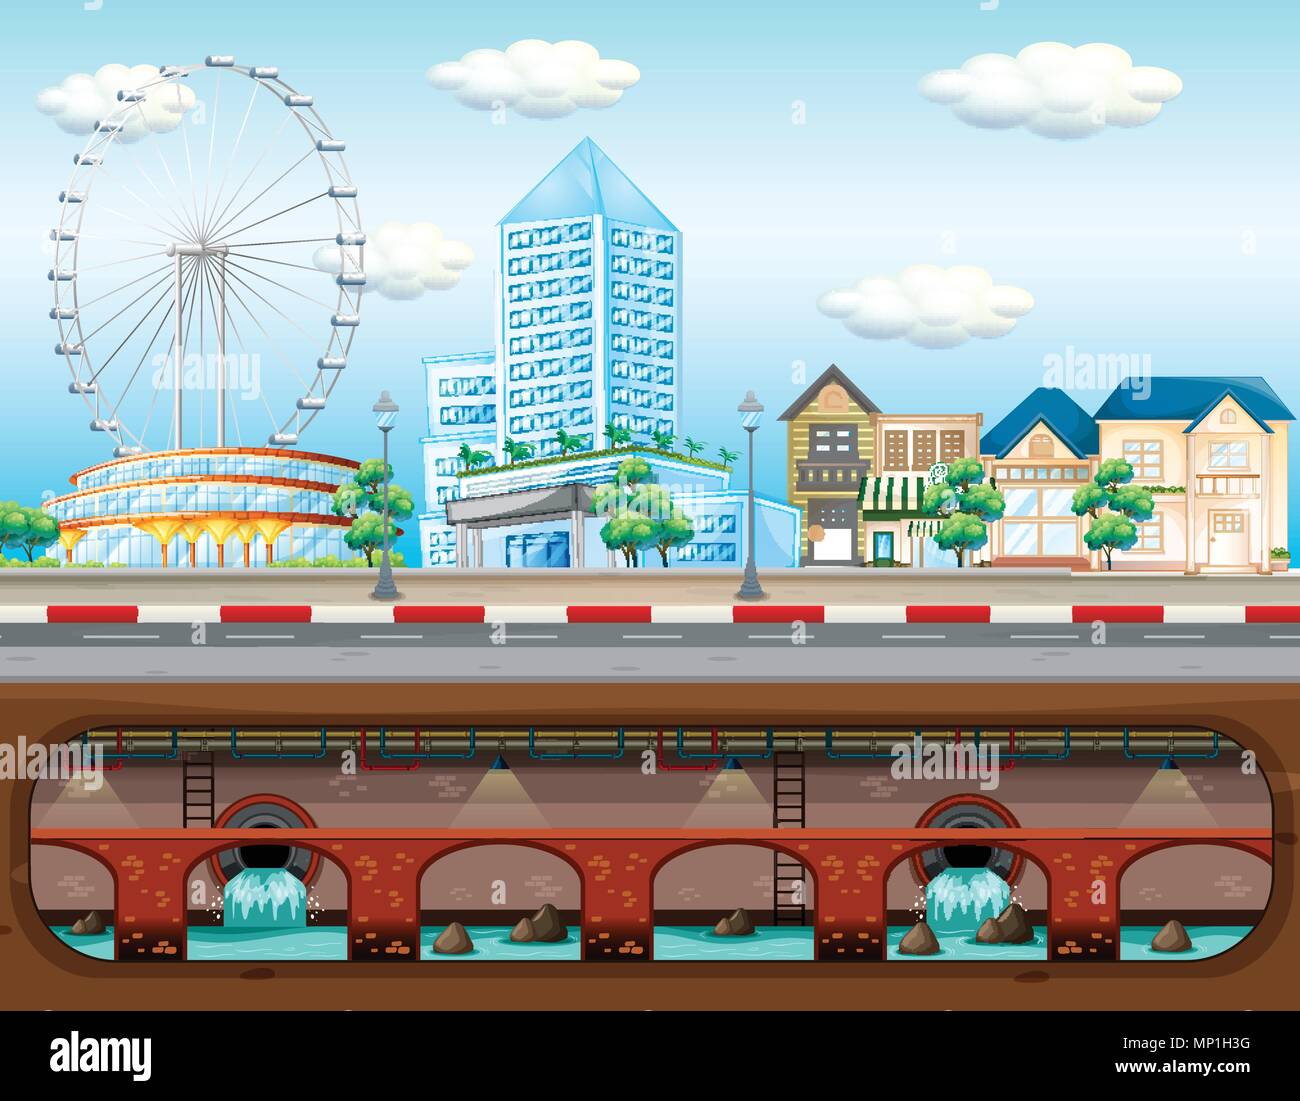 Sewer System in Big City illustration Stock Vector